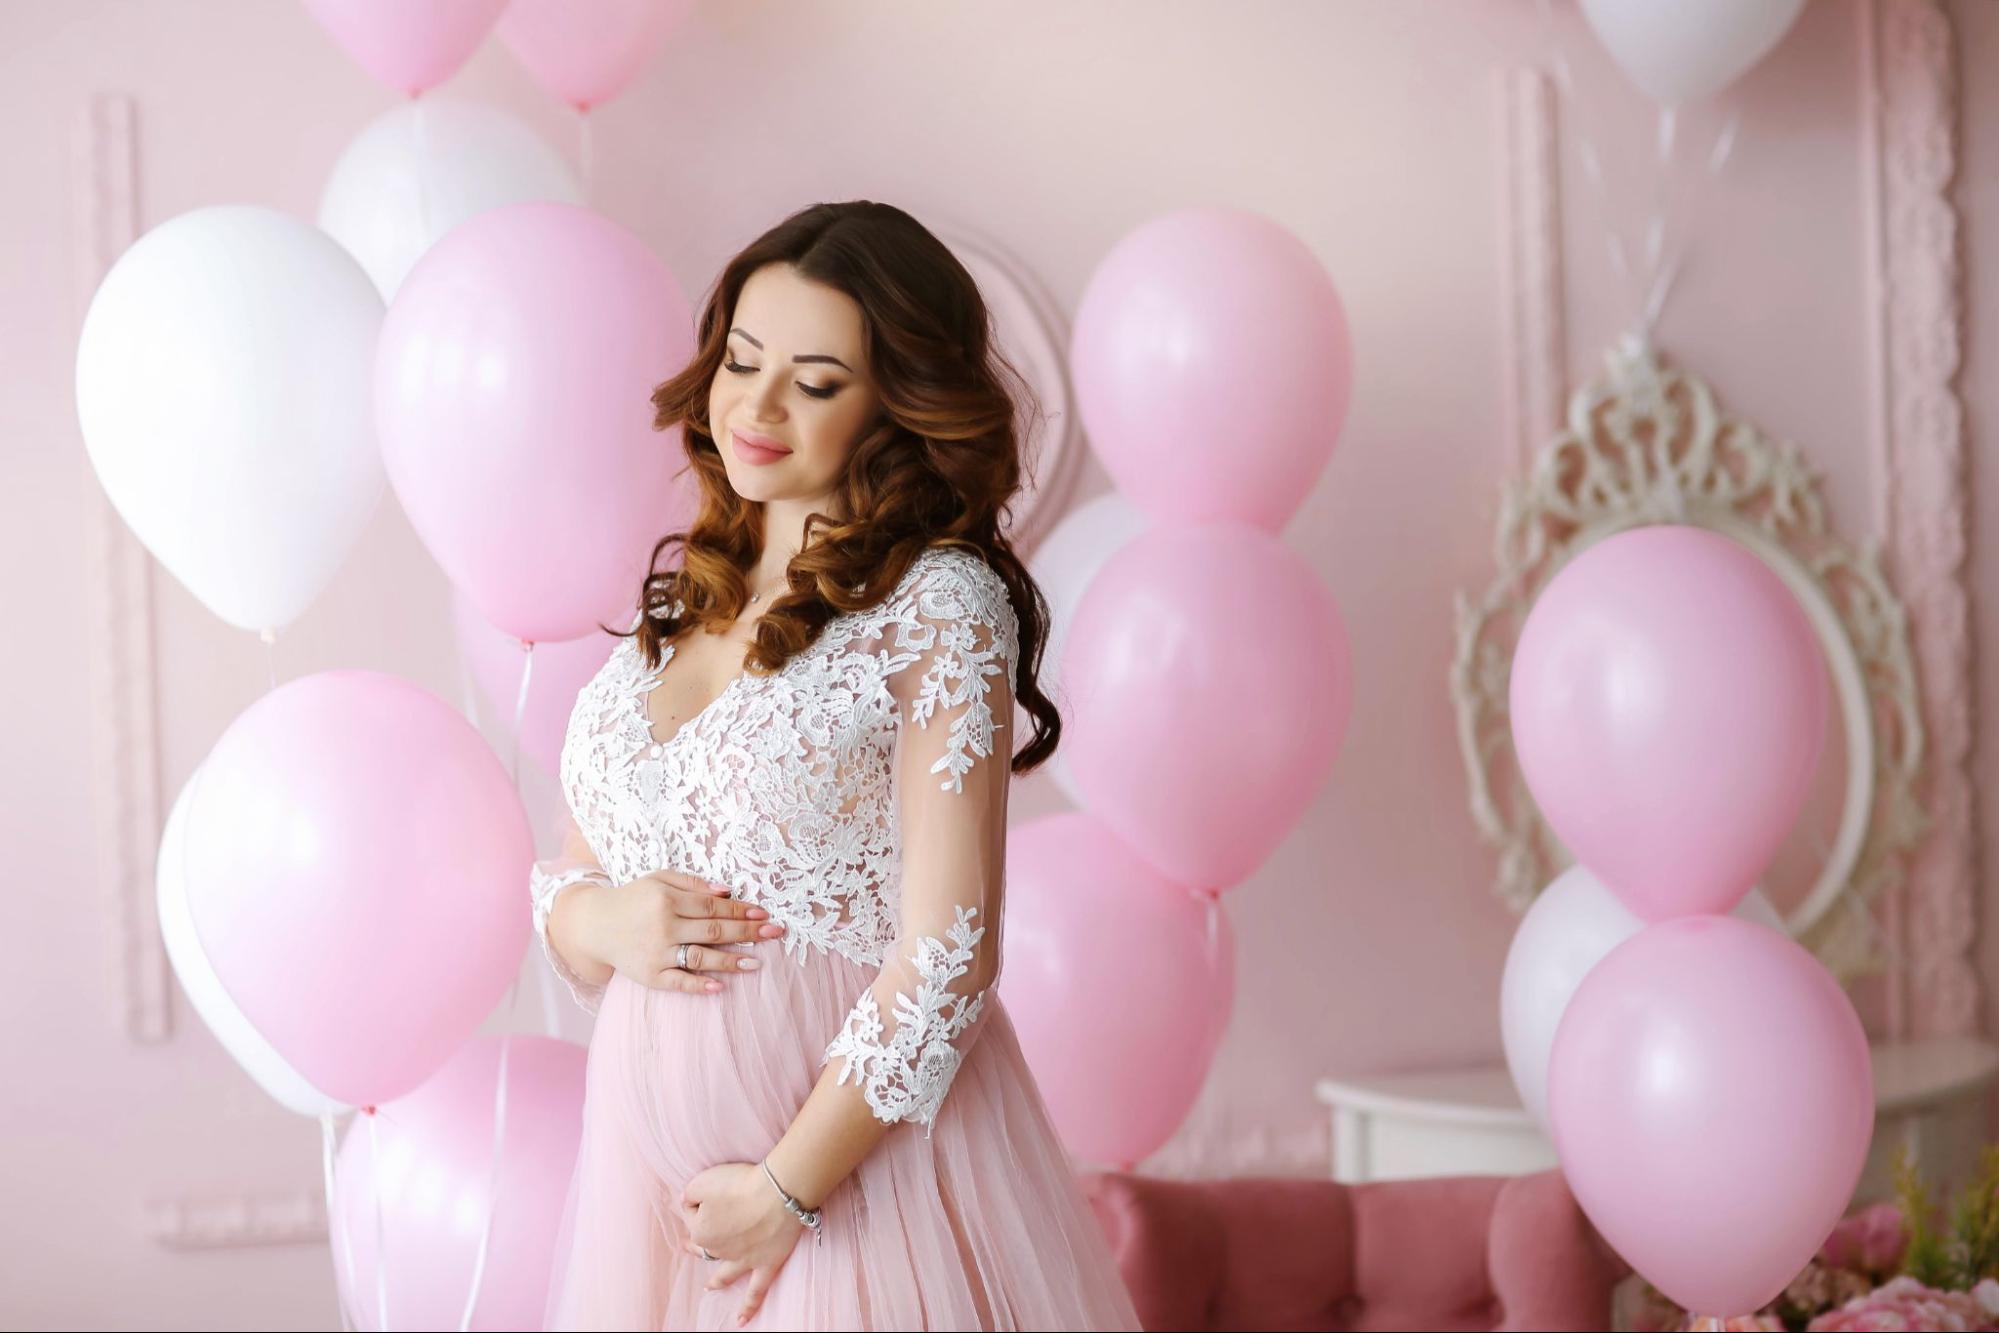 -Floating joy: Balloon pose at baby shower, capturing the whimsy and excitement in the air.